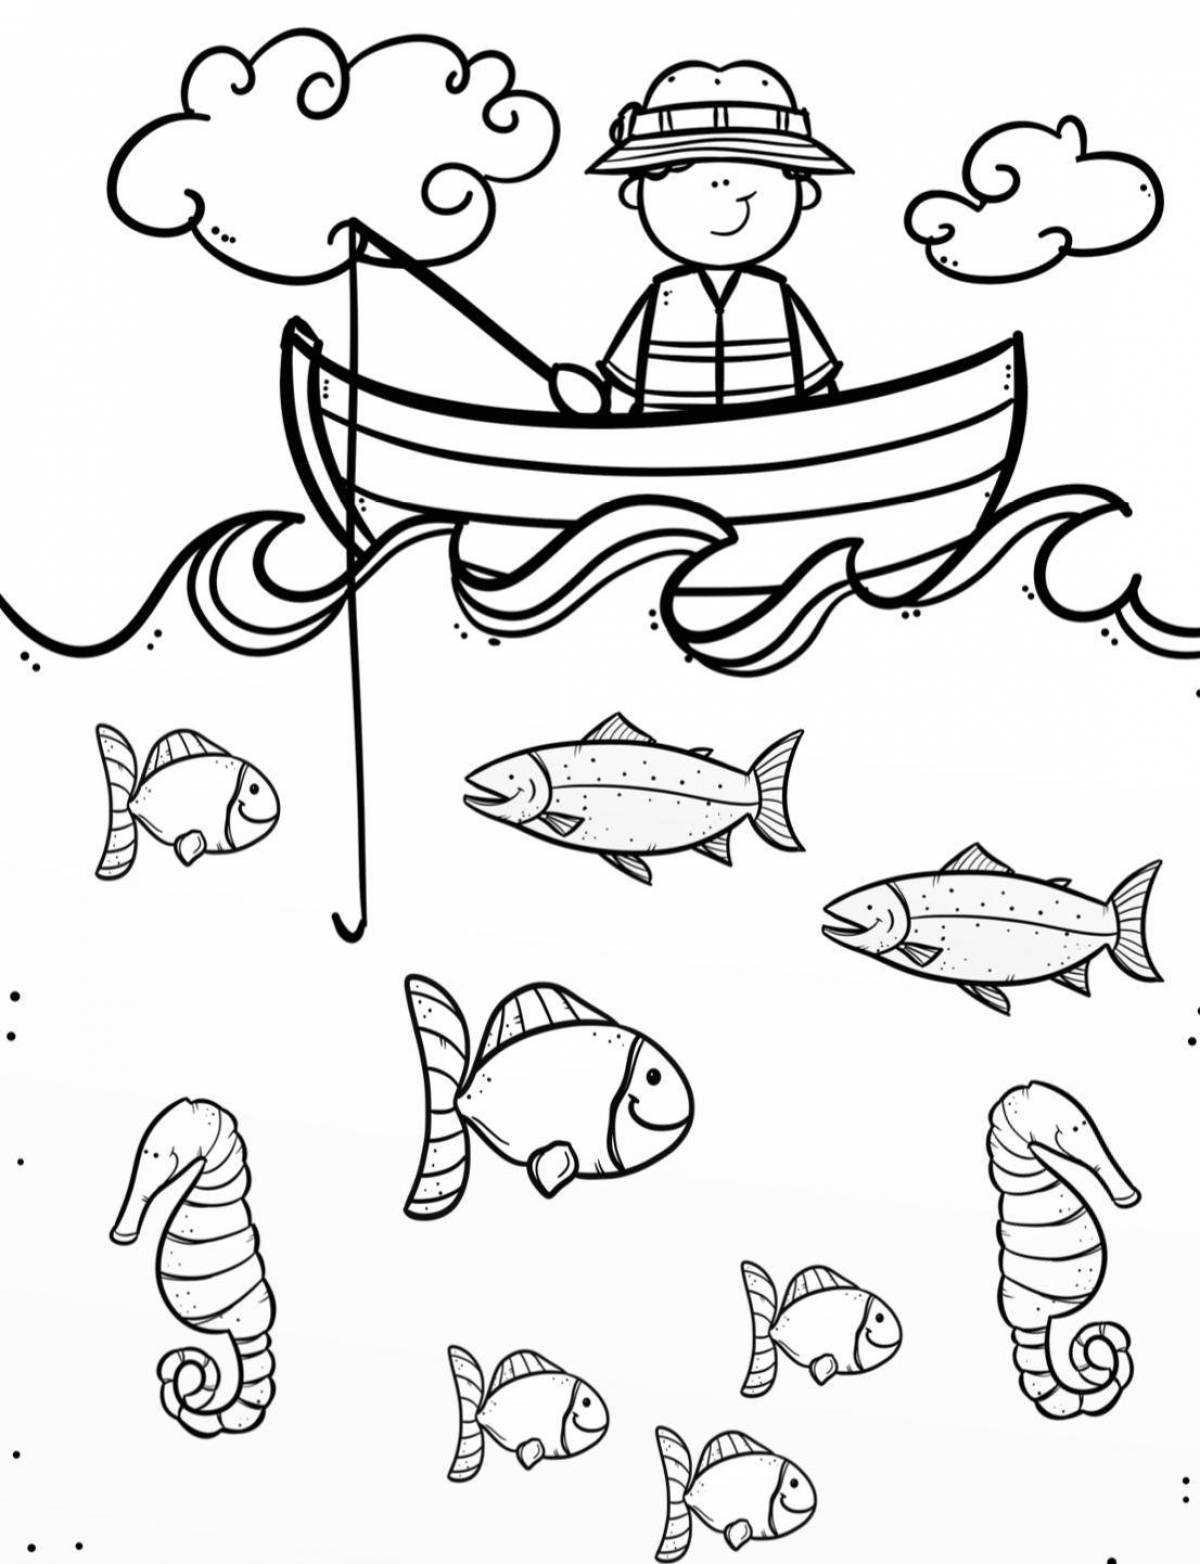 Glorious sea coloring book for children 6-7 years old